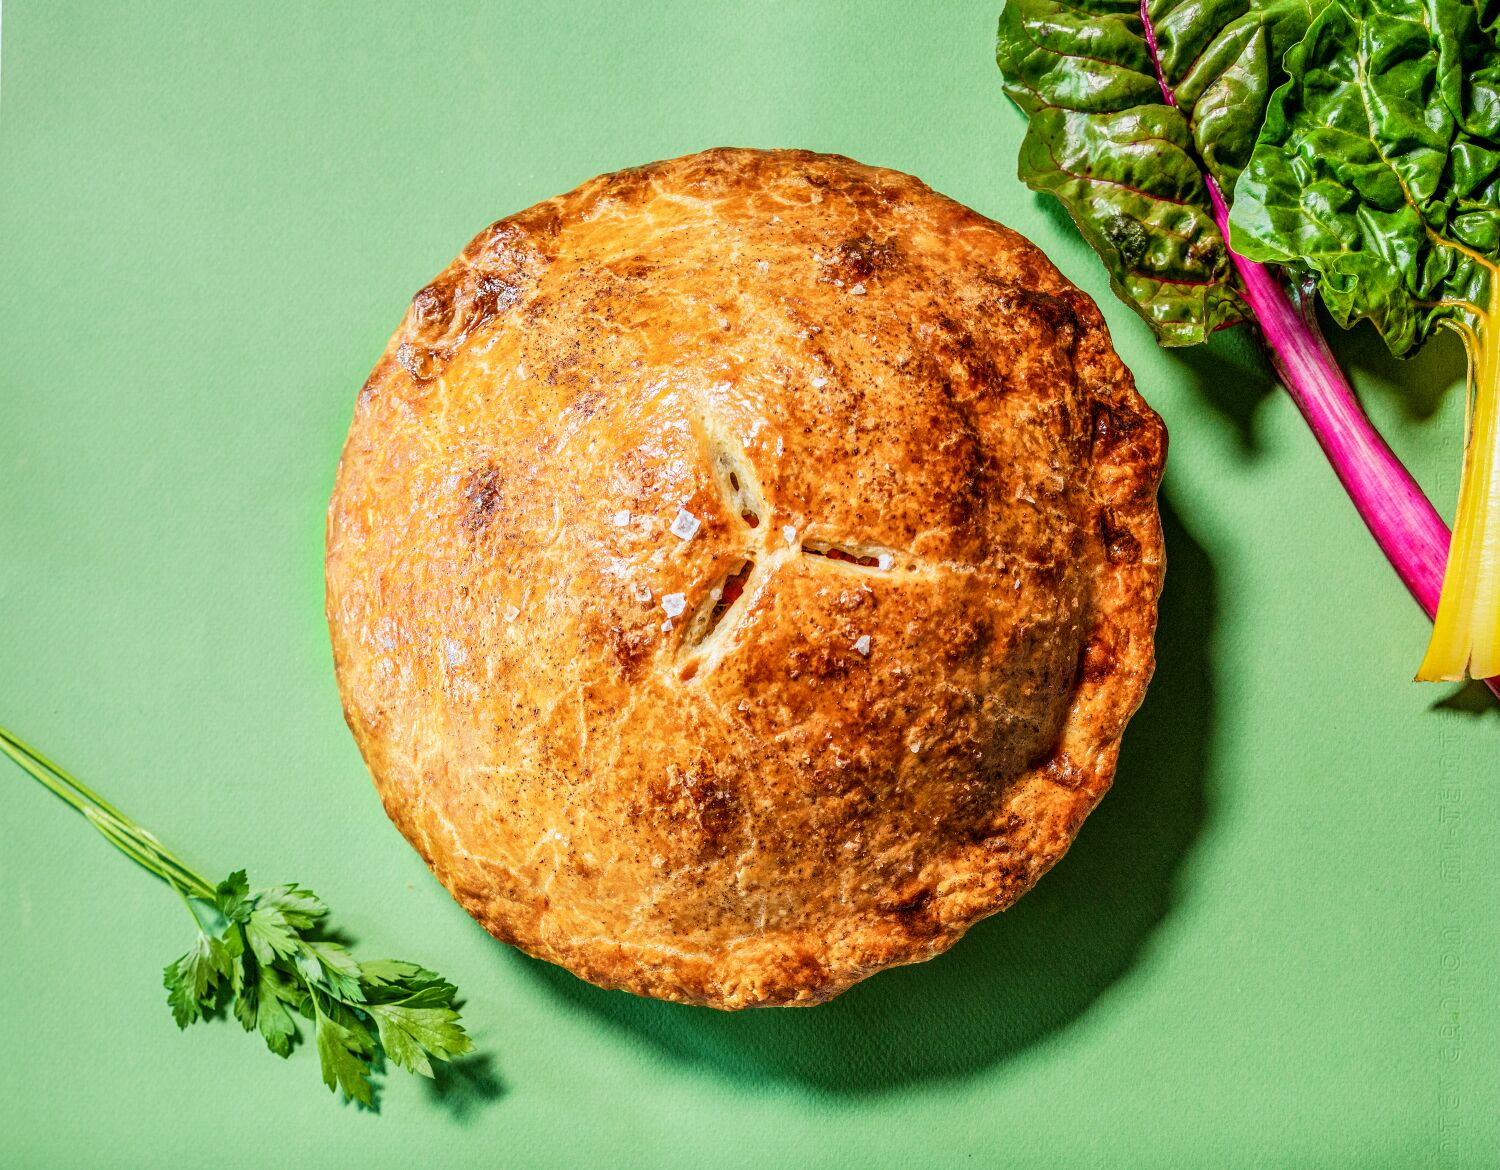 A summery chicken potpie is the antidote for June gloom